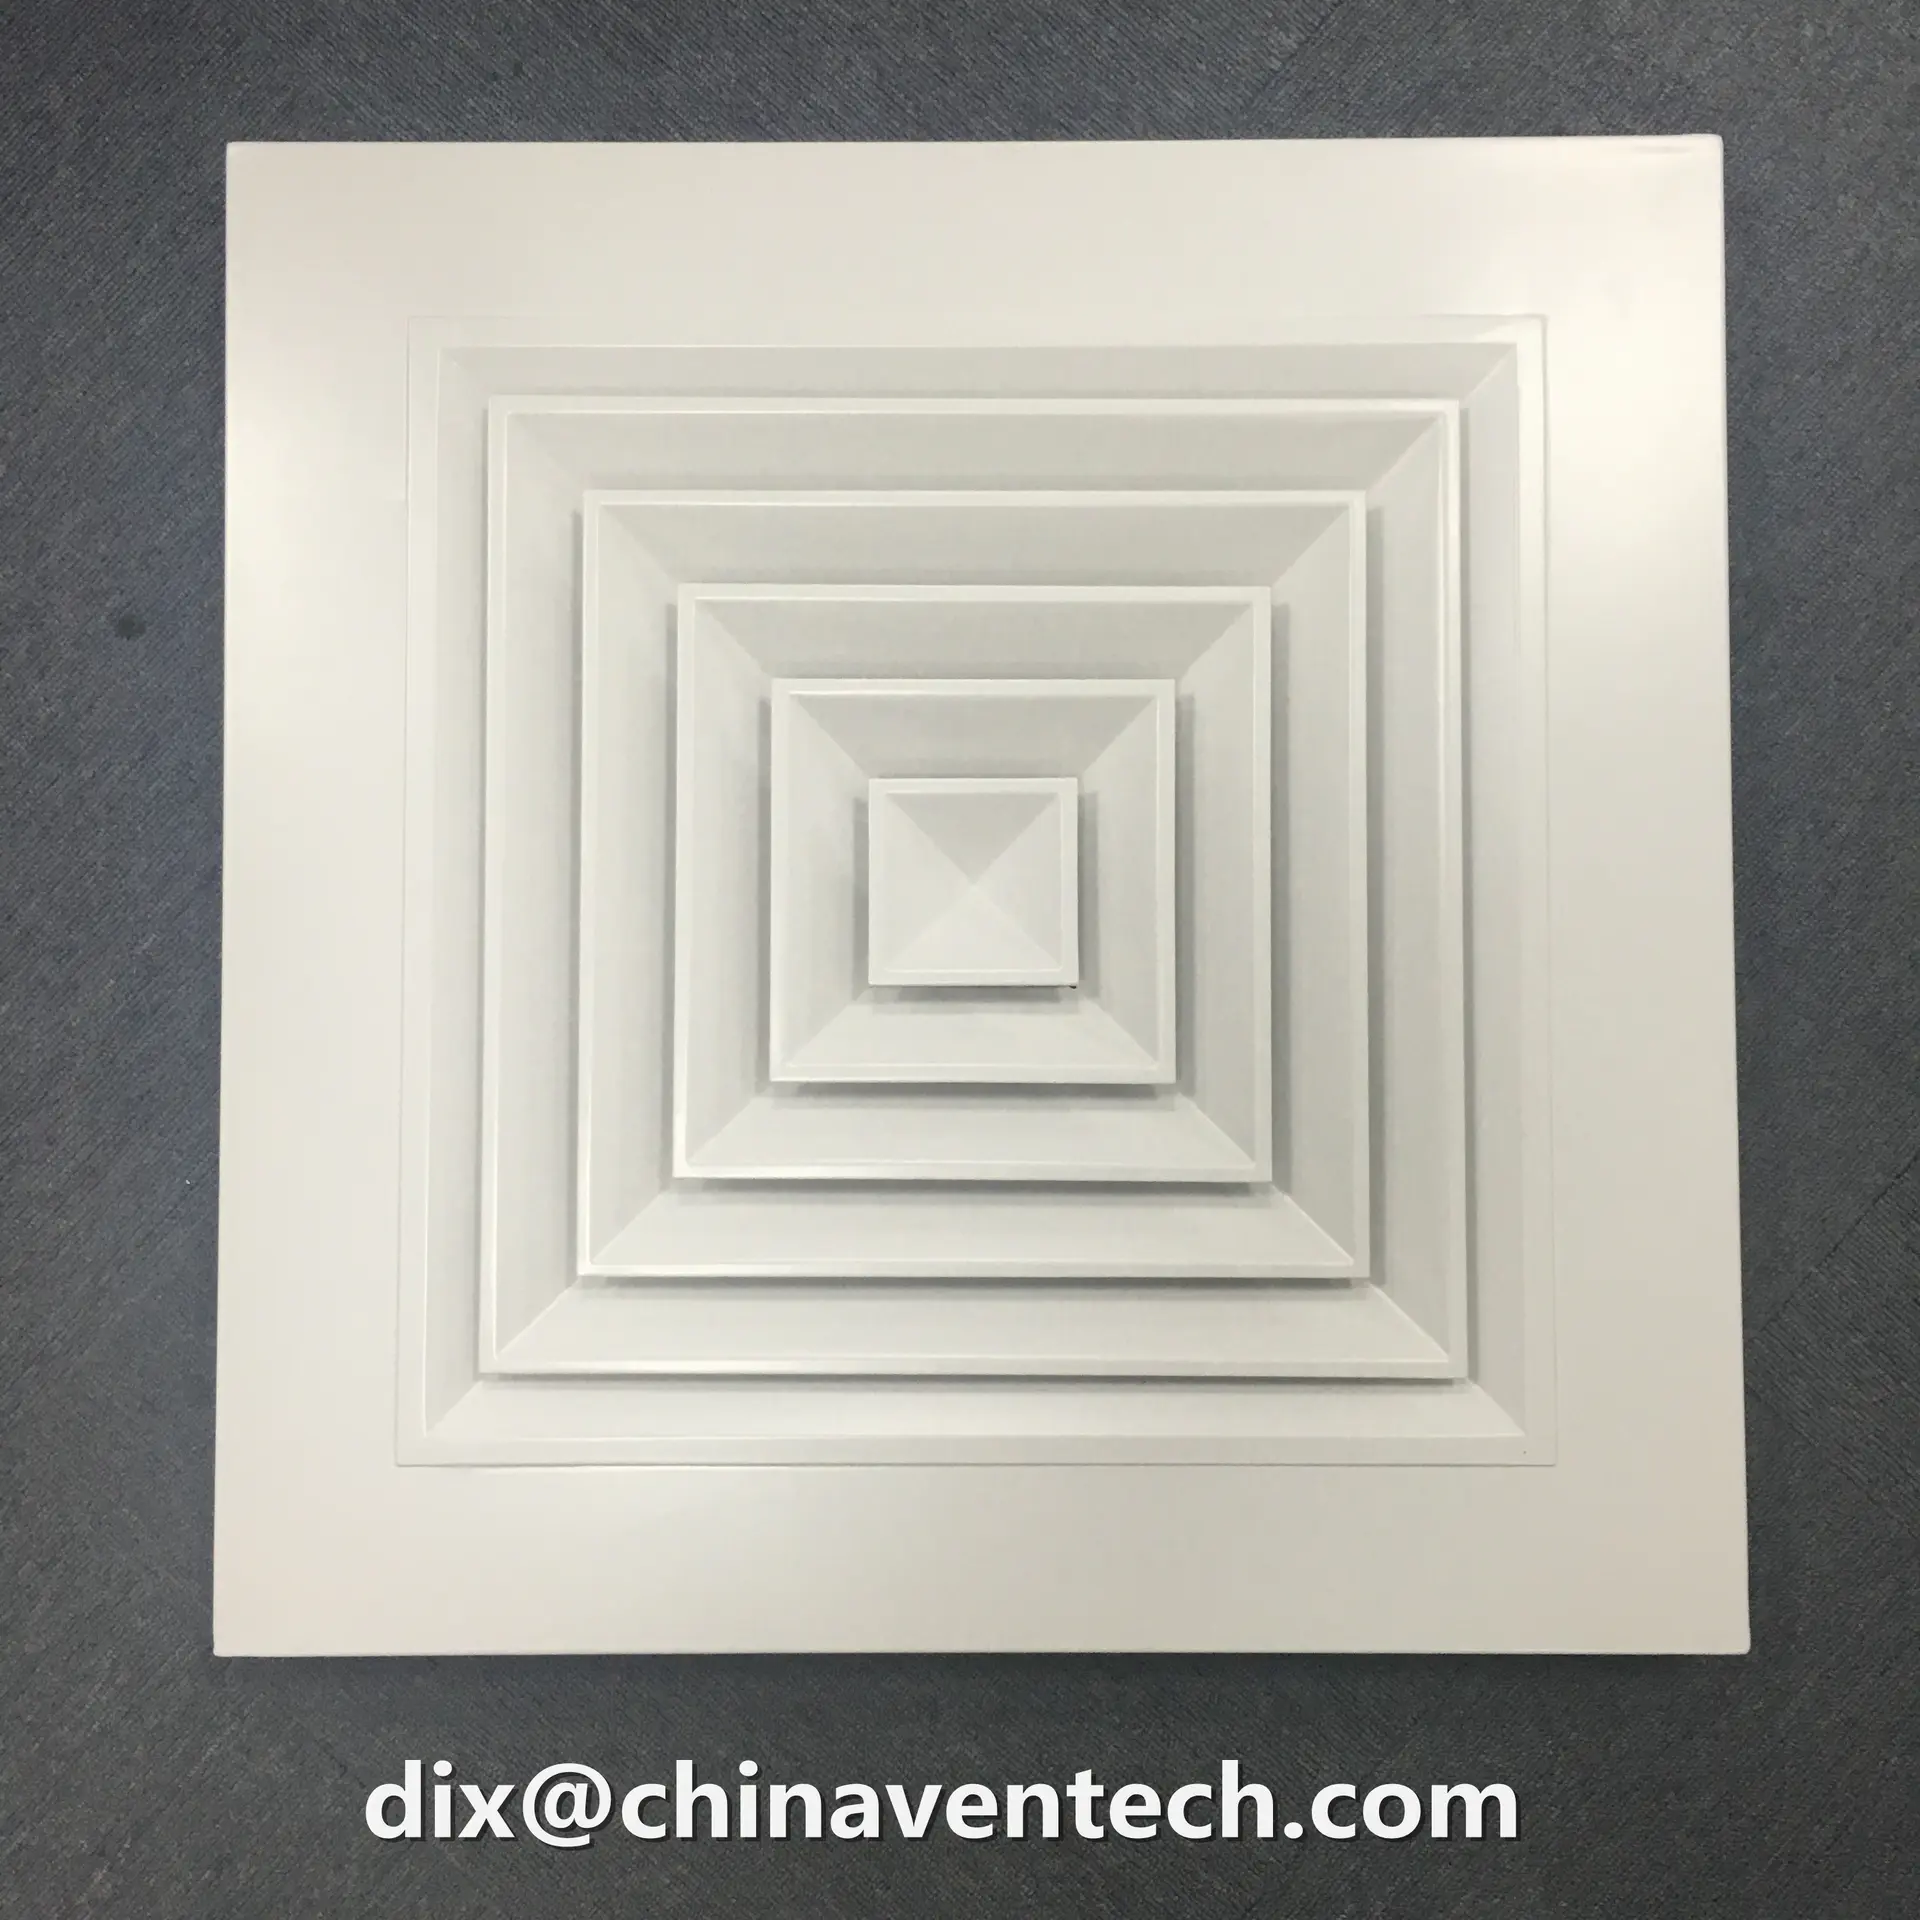 HVAC Aluminum Extract Air Ceiling Replacement 600x600mm Tile 4 Way Square Diffuser